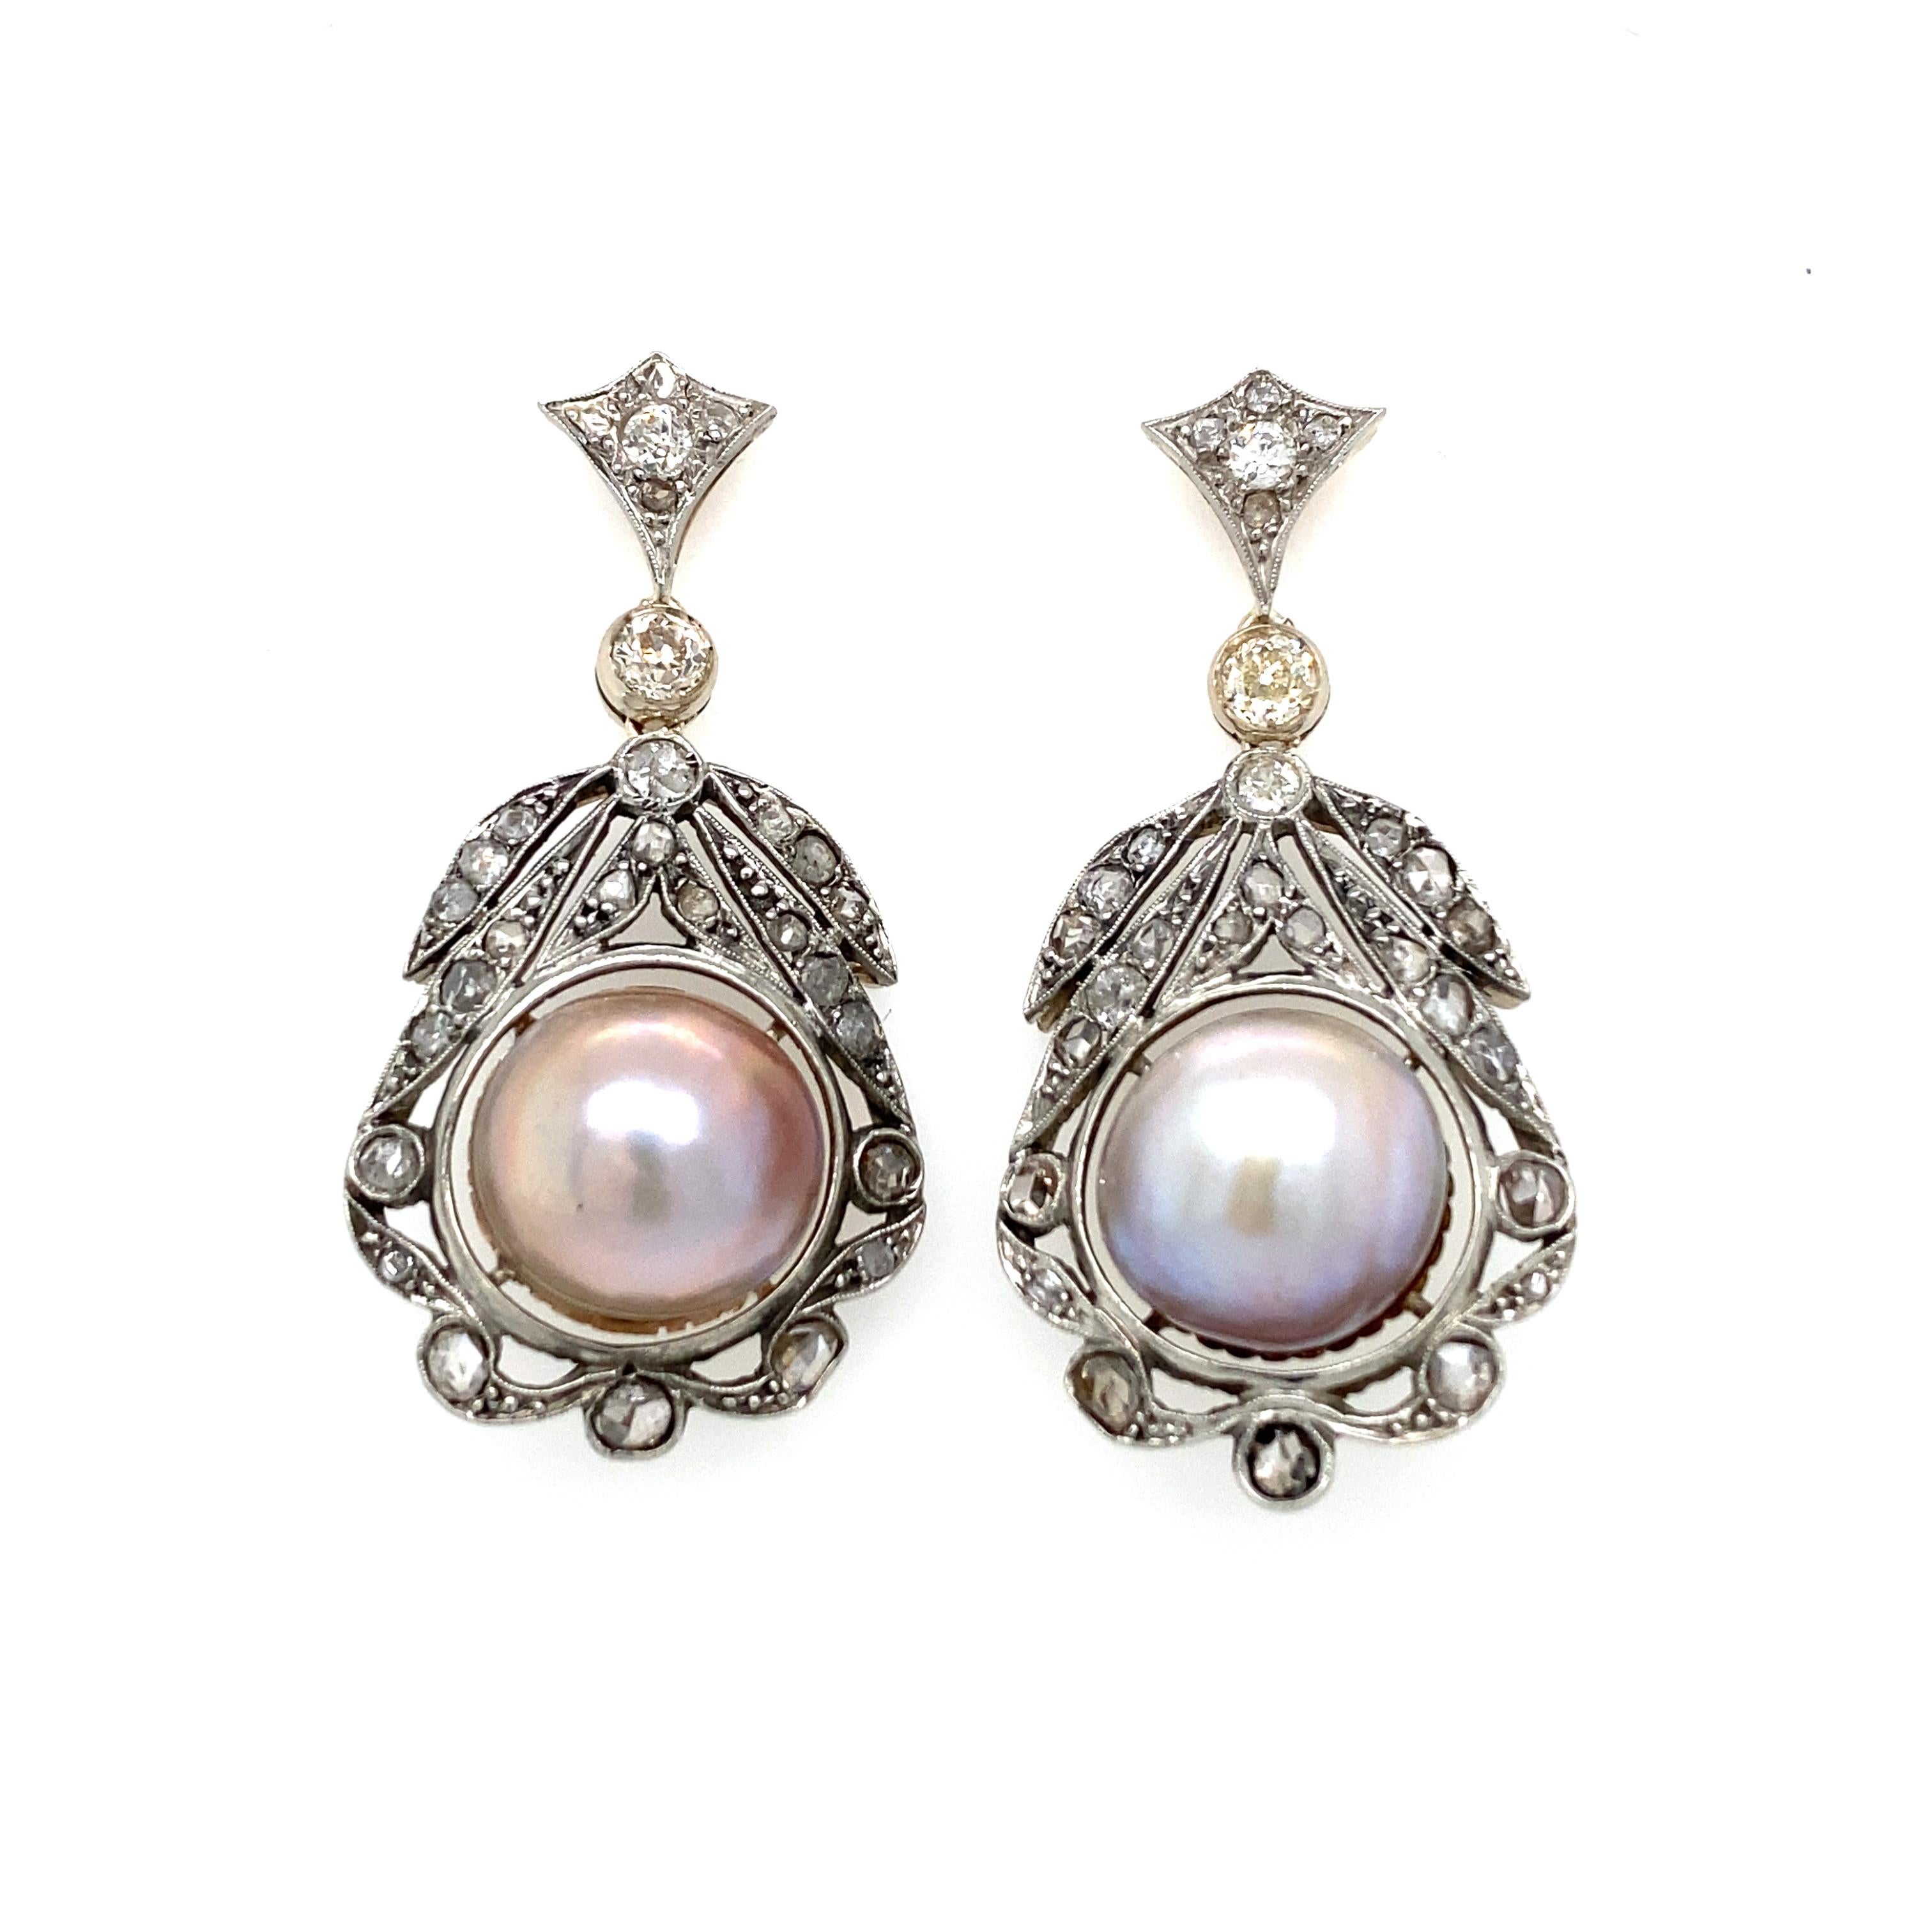 This important pair of diamond 18k gold earrings feature sparkling Old mine cut and Rose cut Diamonds weighing a total of approximately 1.70 carat, graded from H/K color with Vs clarity, and two cultured mabè pearls 12 mm. 
Circa 1800'

CONDITION: